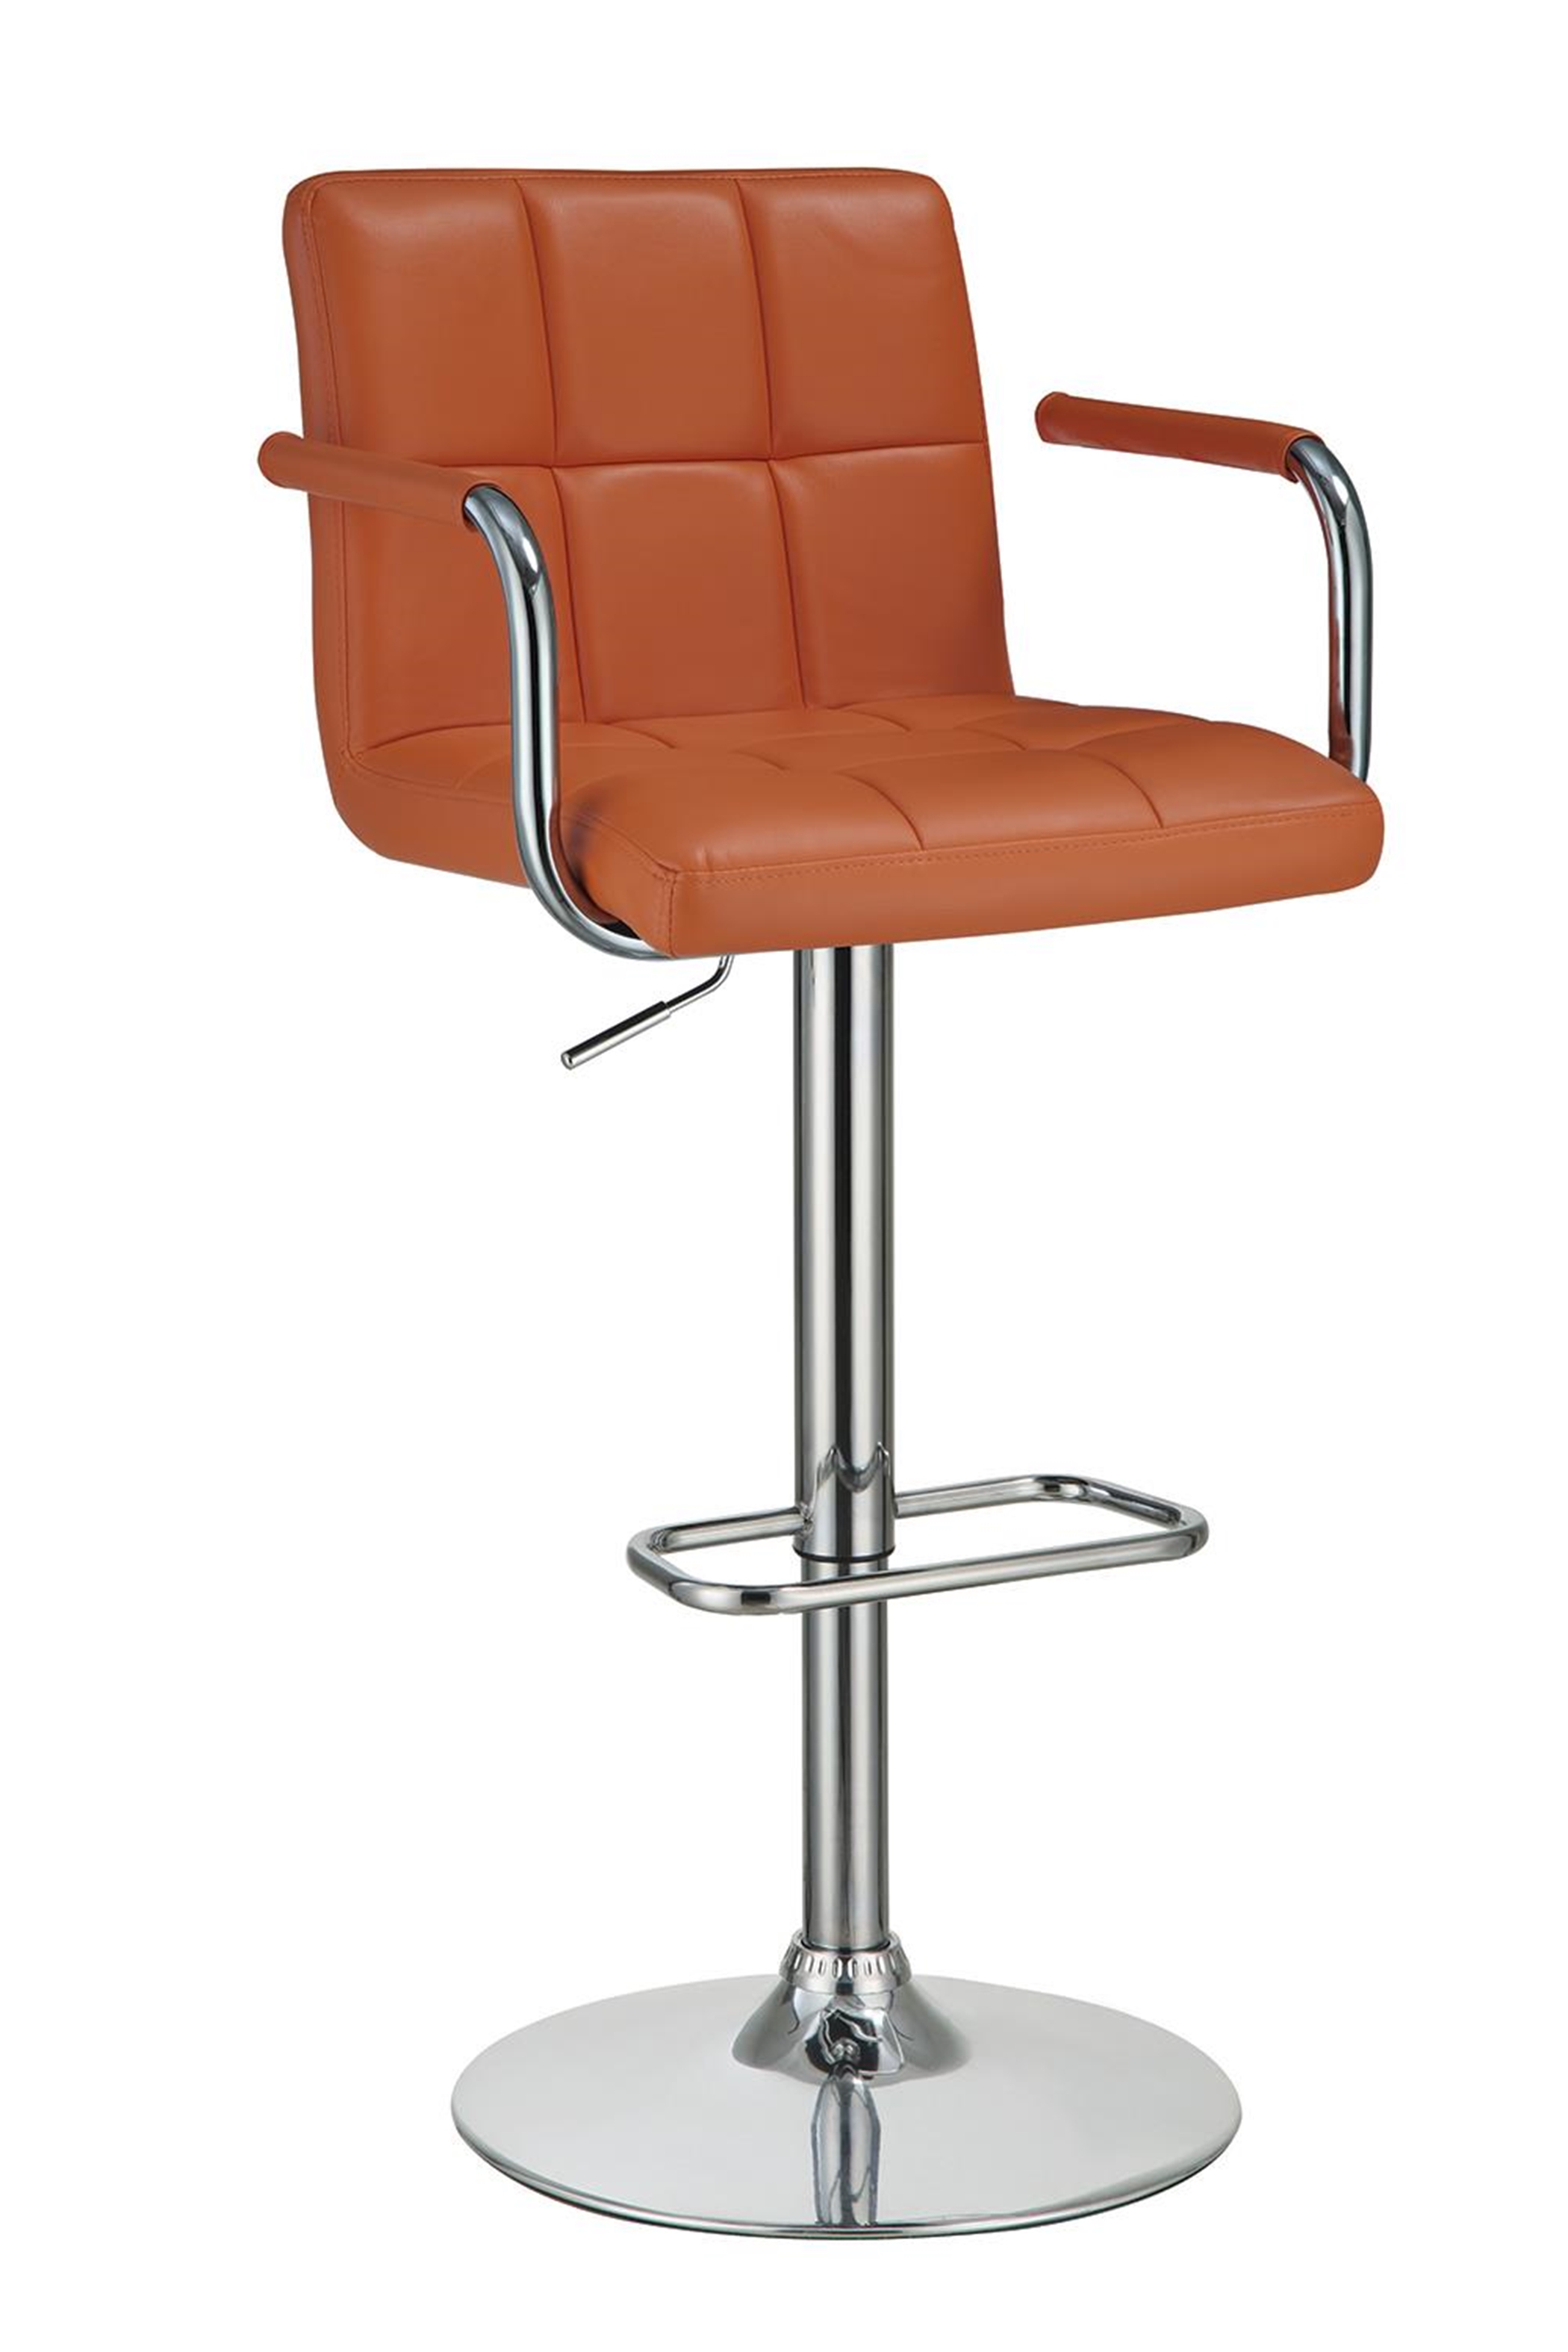 Contemporary Pumpkin and Chrome Adjustable Bar Stool with Arms - Click Image to Close